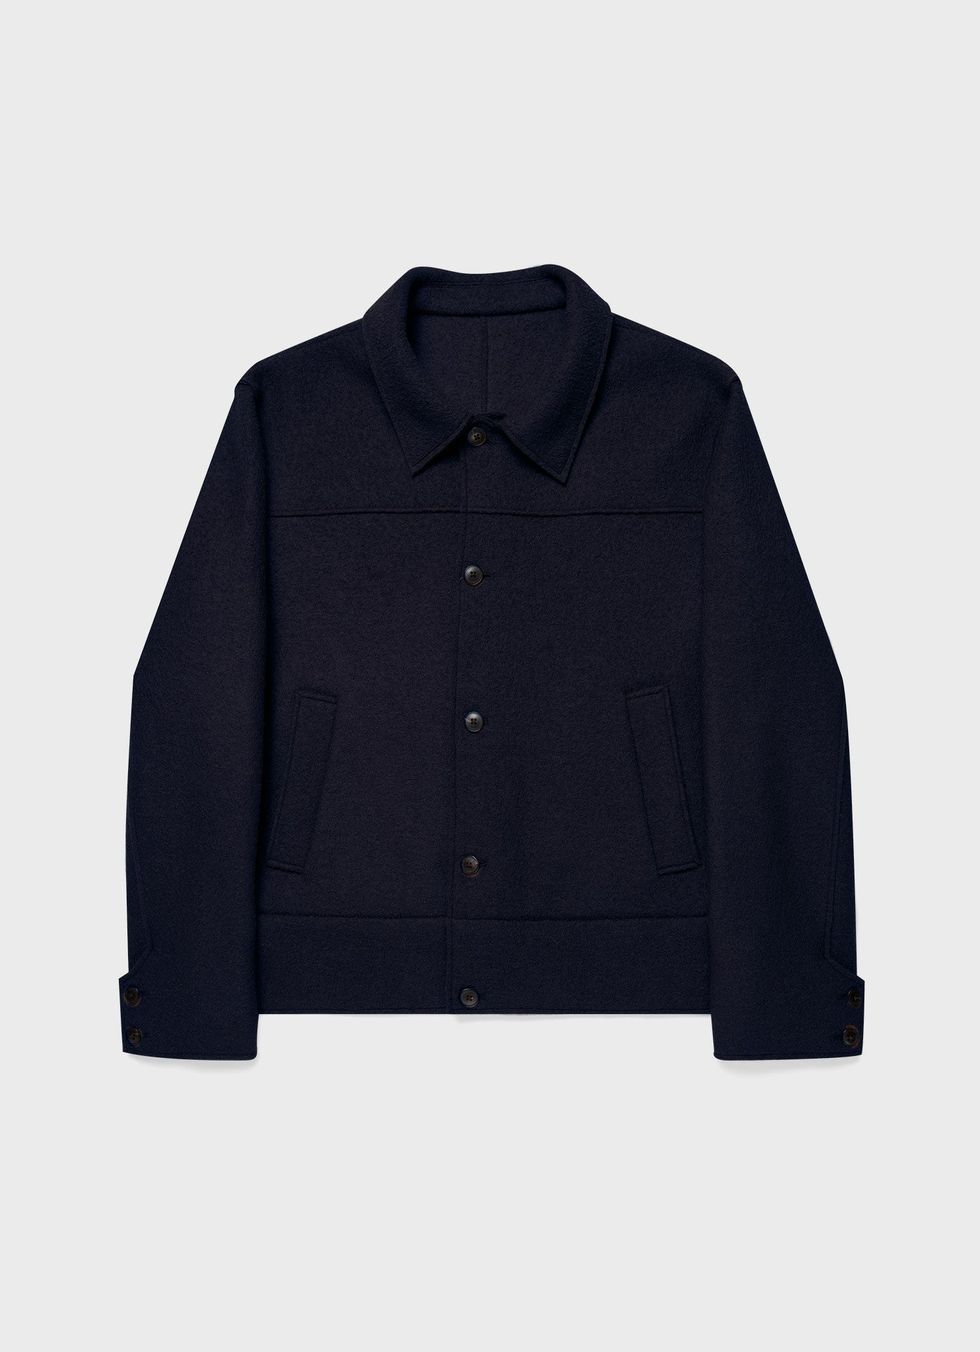 The Sunspel X Casely-Hayford Collab Will Save Your Winter Wardrobe